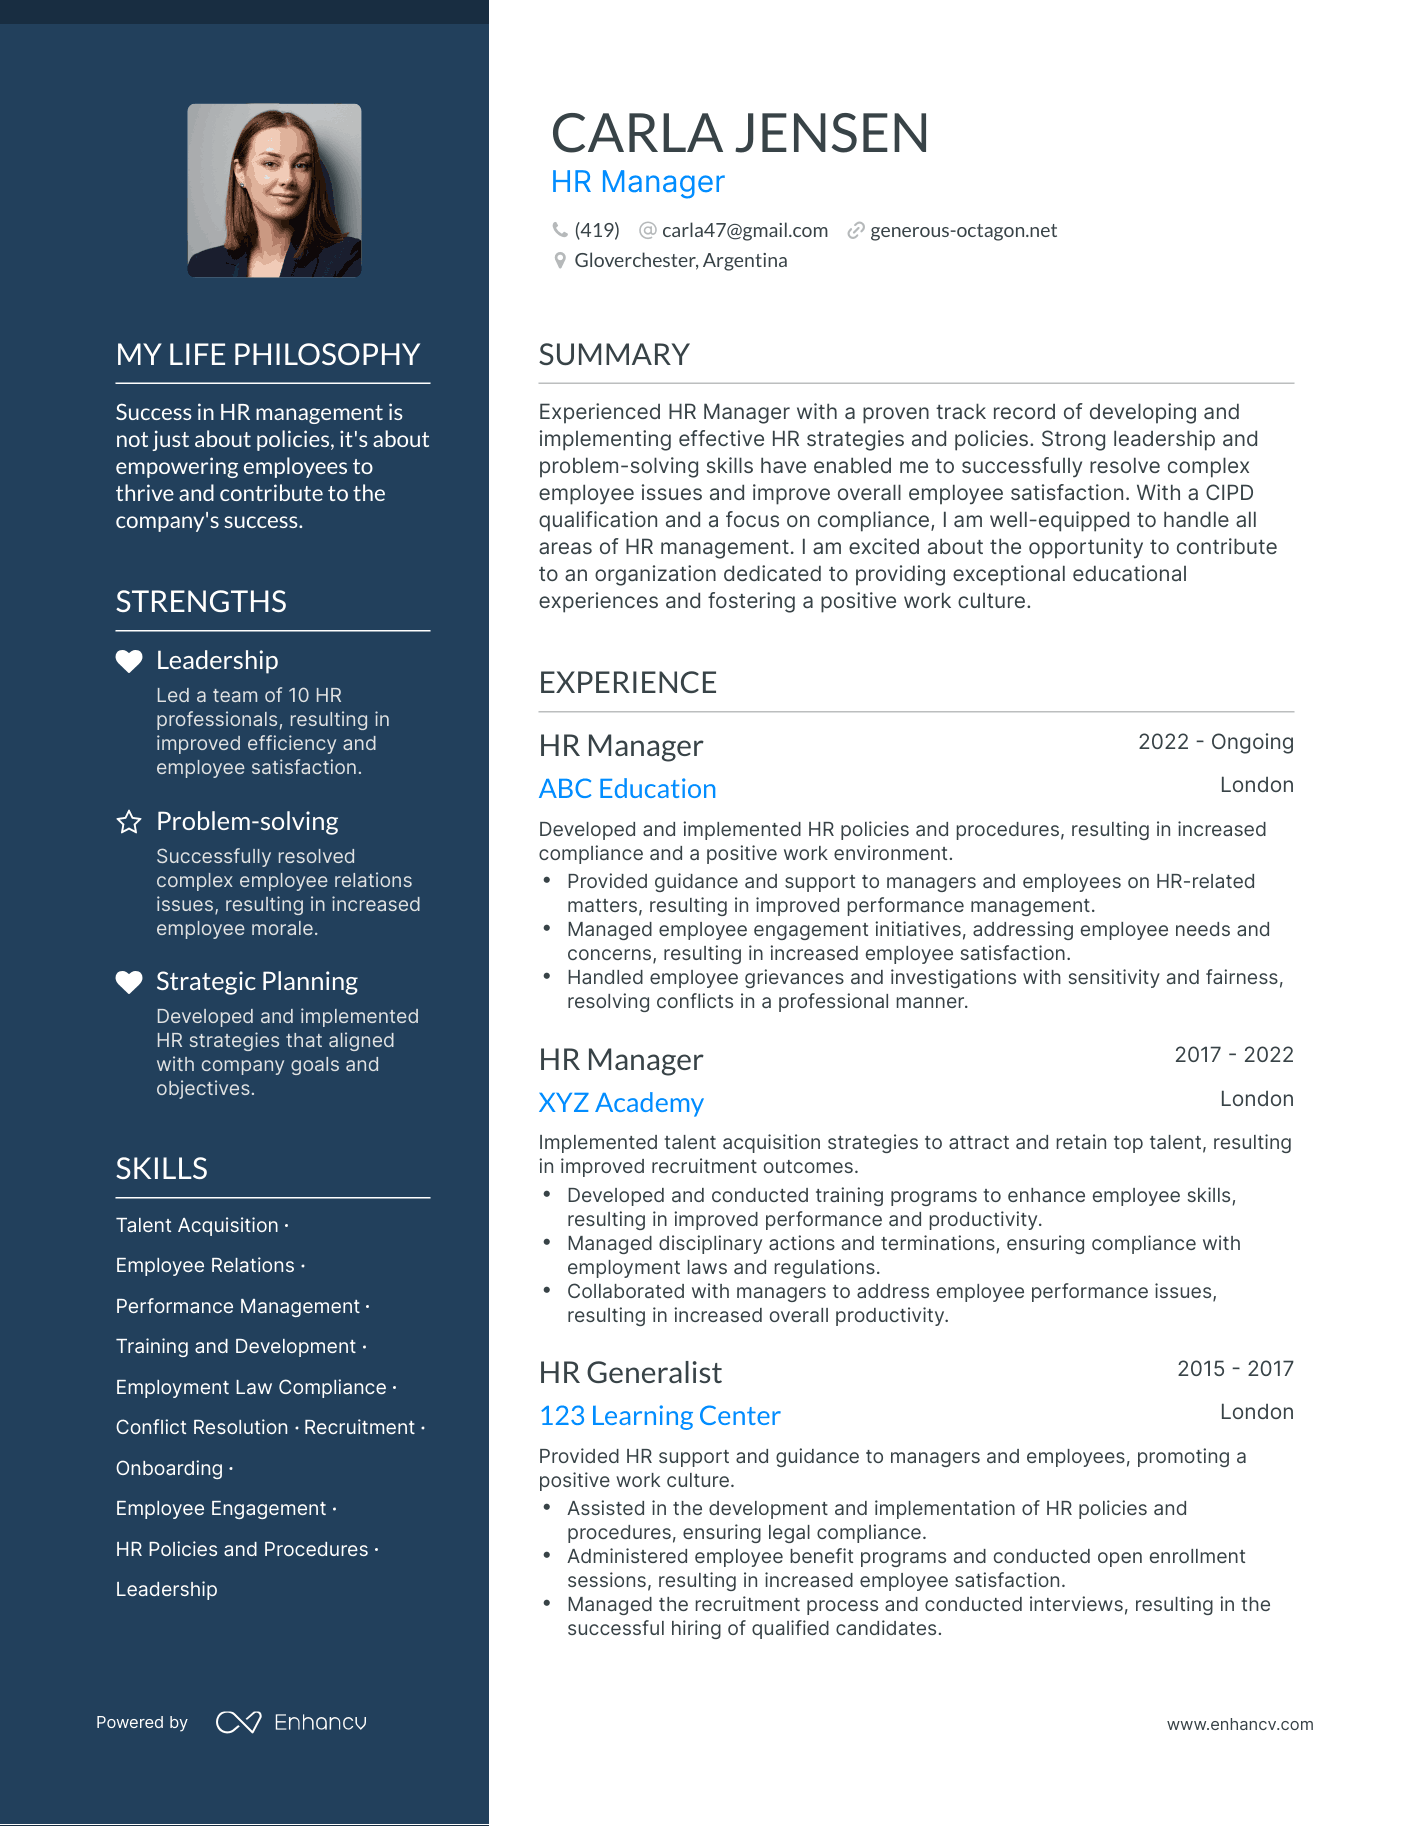 HR Manager resume example